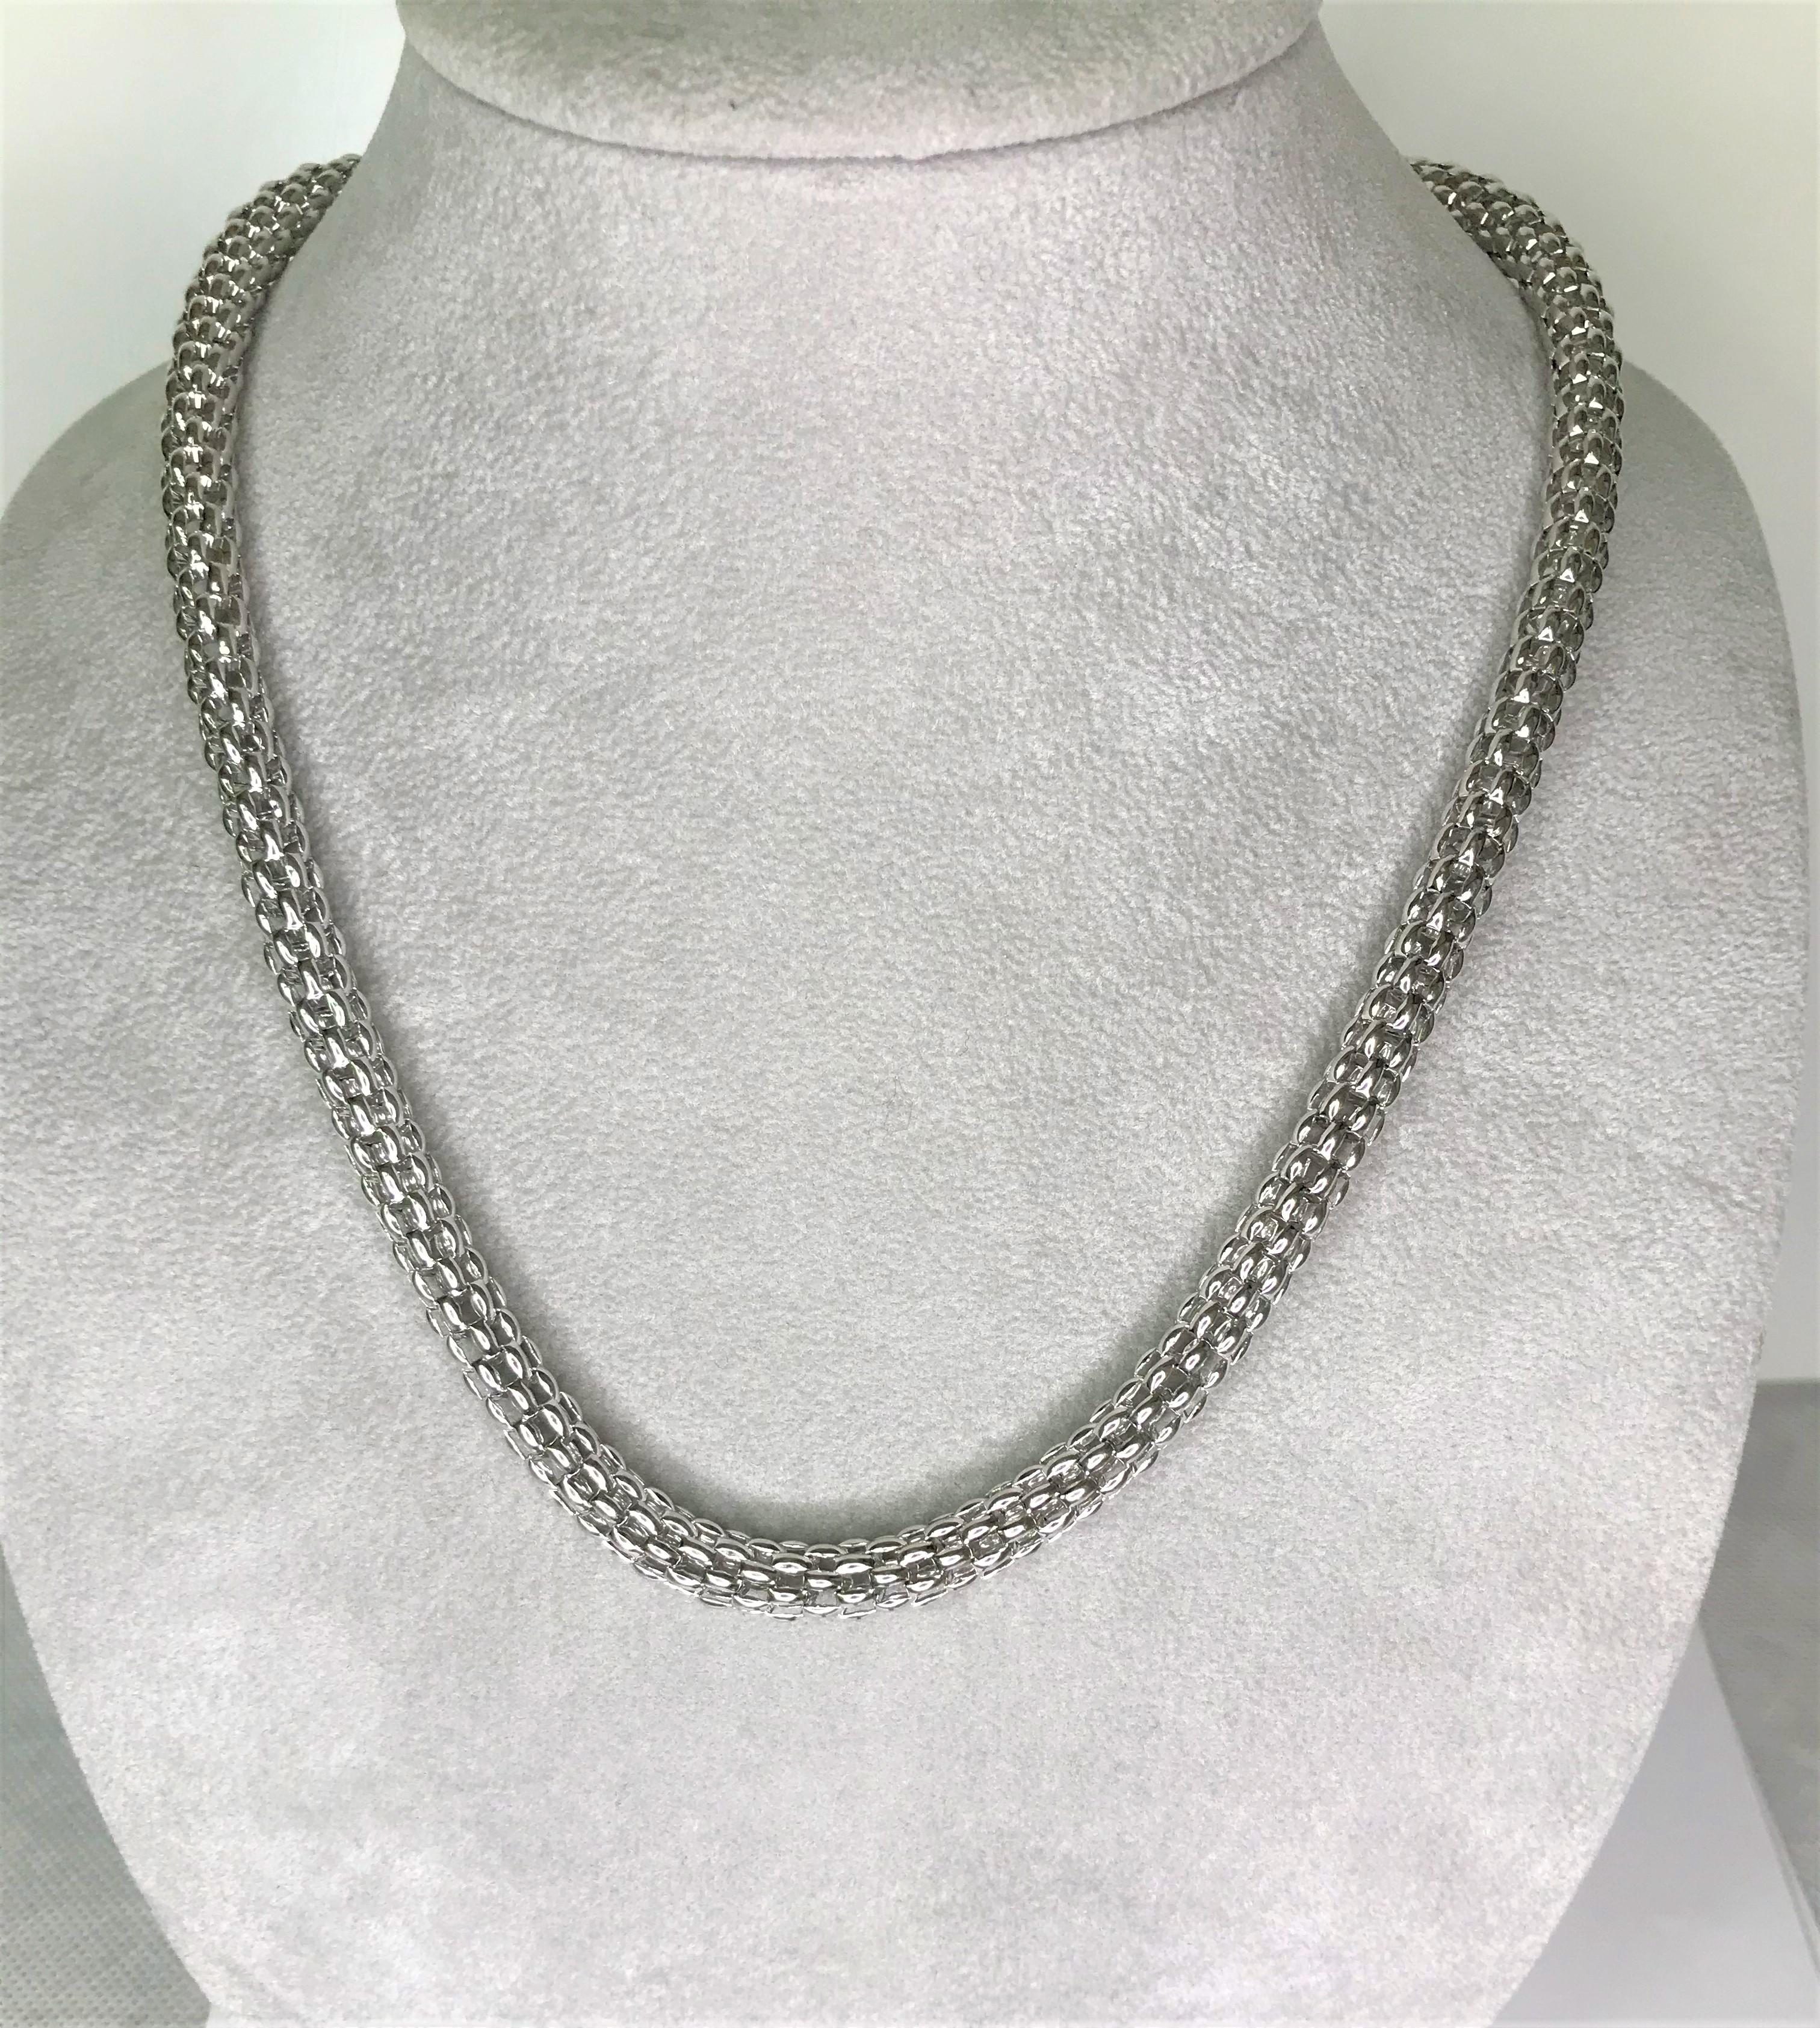 By designer N.S. Friedman Designs Inc.
Sterling silver 'cage' necklace - great for every day!
Strong mesh link around hollow center
Approximately 7mm and 20